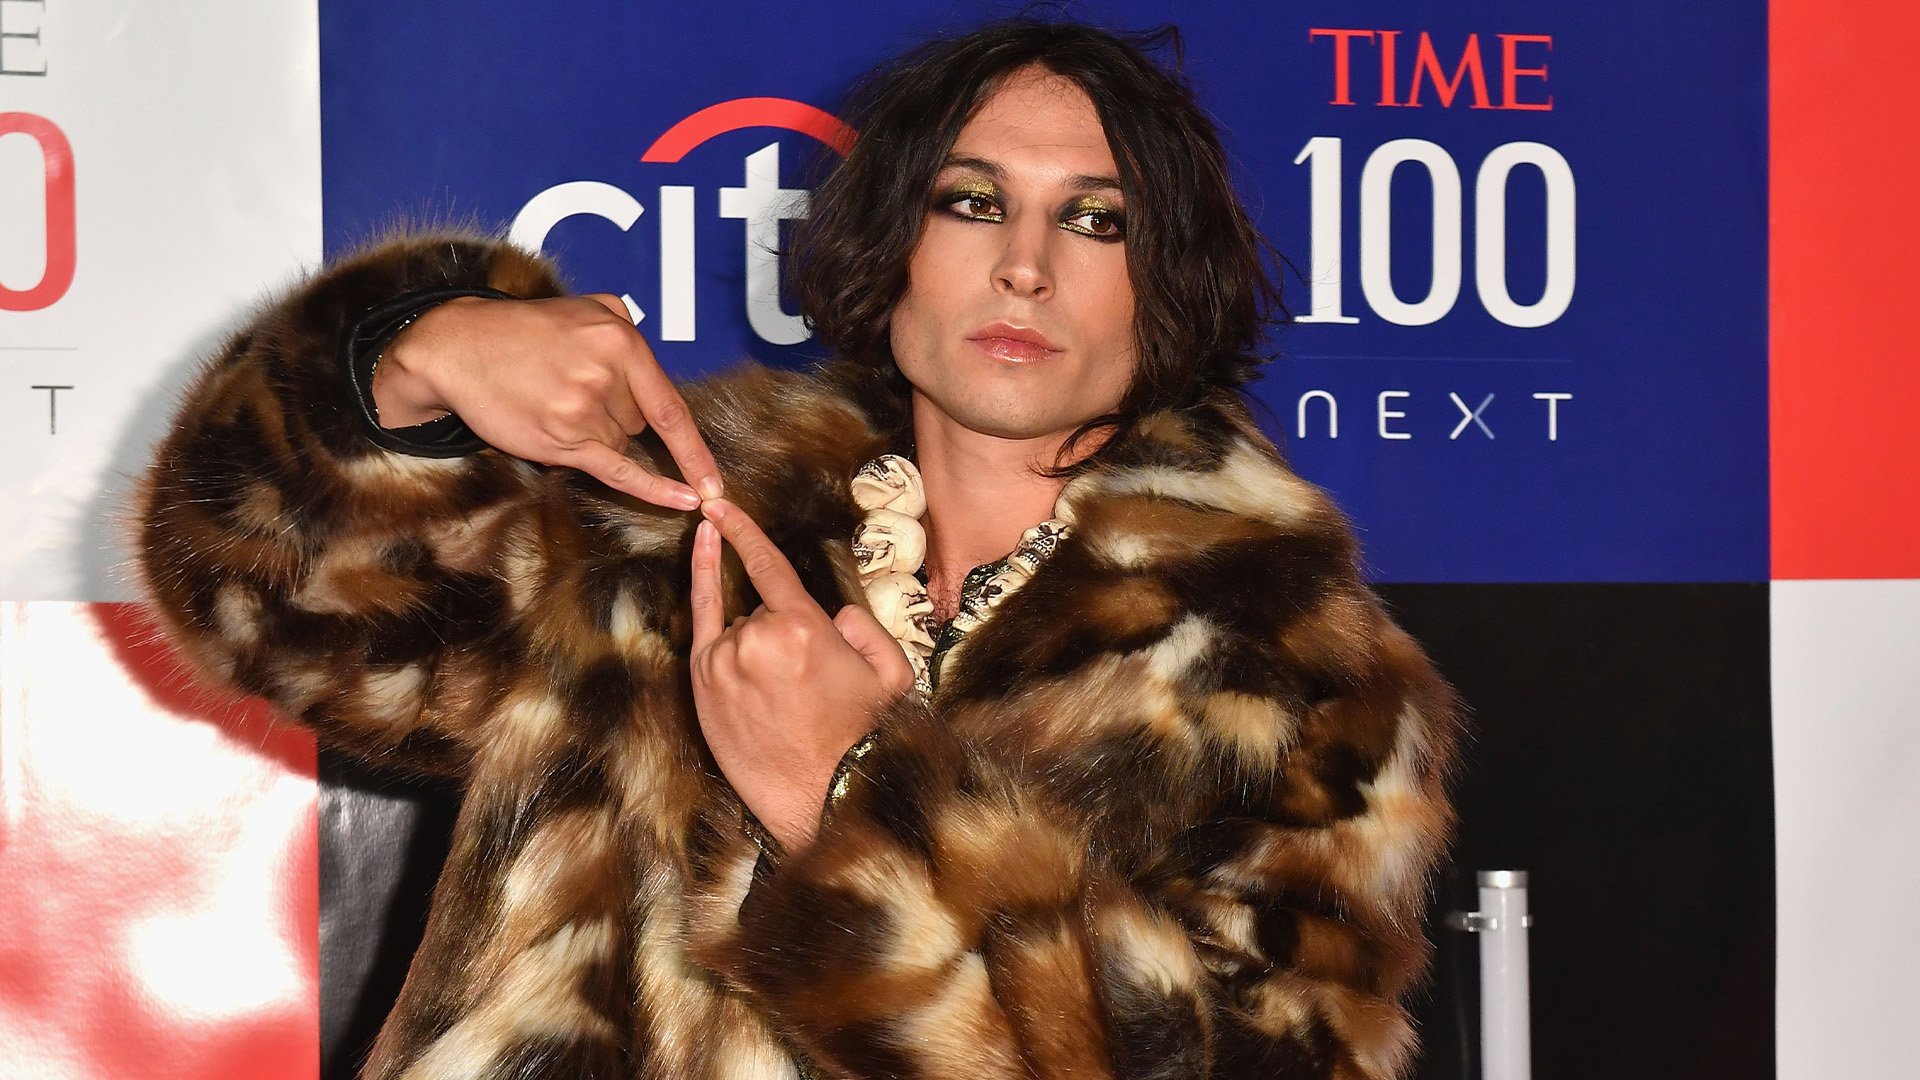 US actor Ezra Miller attends the First Annual "Time 100 Next" gala at Pier 17 on Nov. 14, 2019. in New York City. Photo by Angela Weiss / AFP via Getty Images.